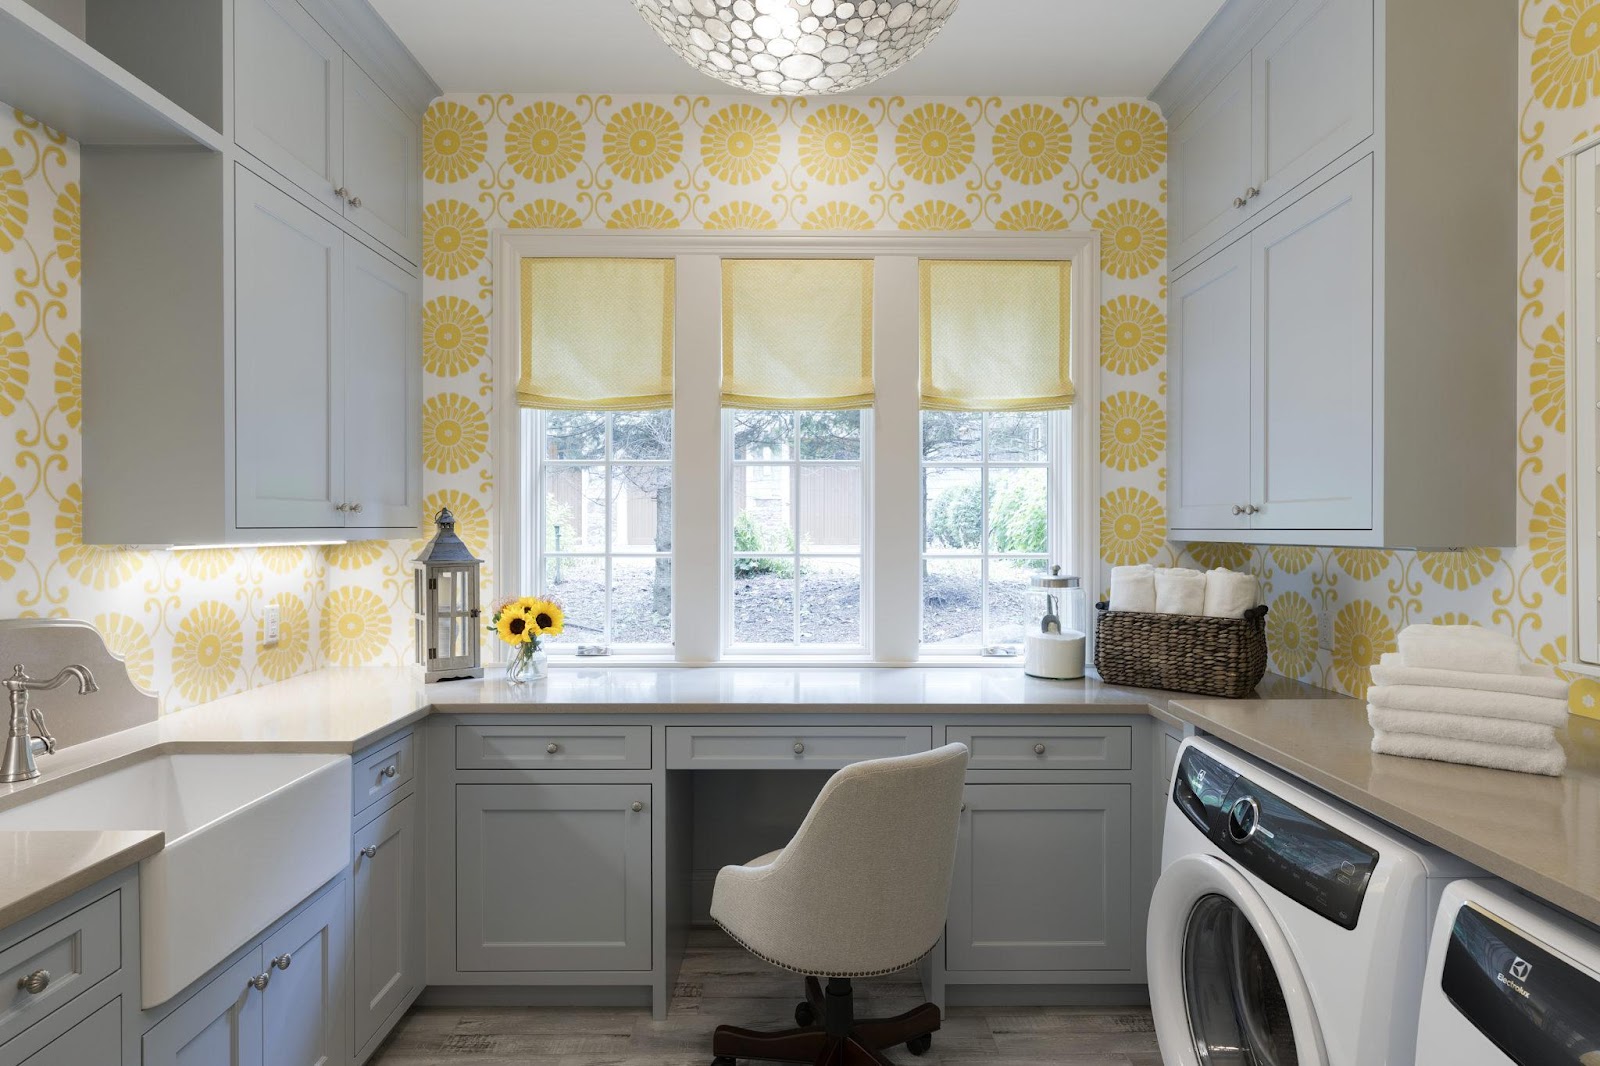 A laundry room with a private office and bright yellow flowers on the walls